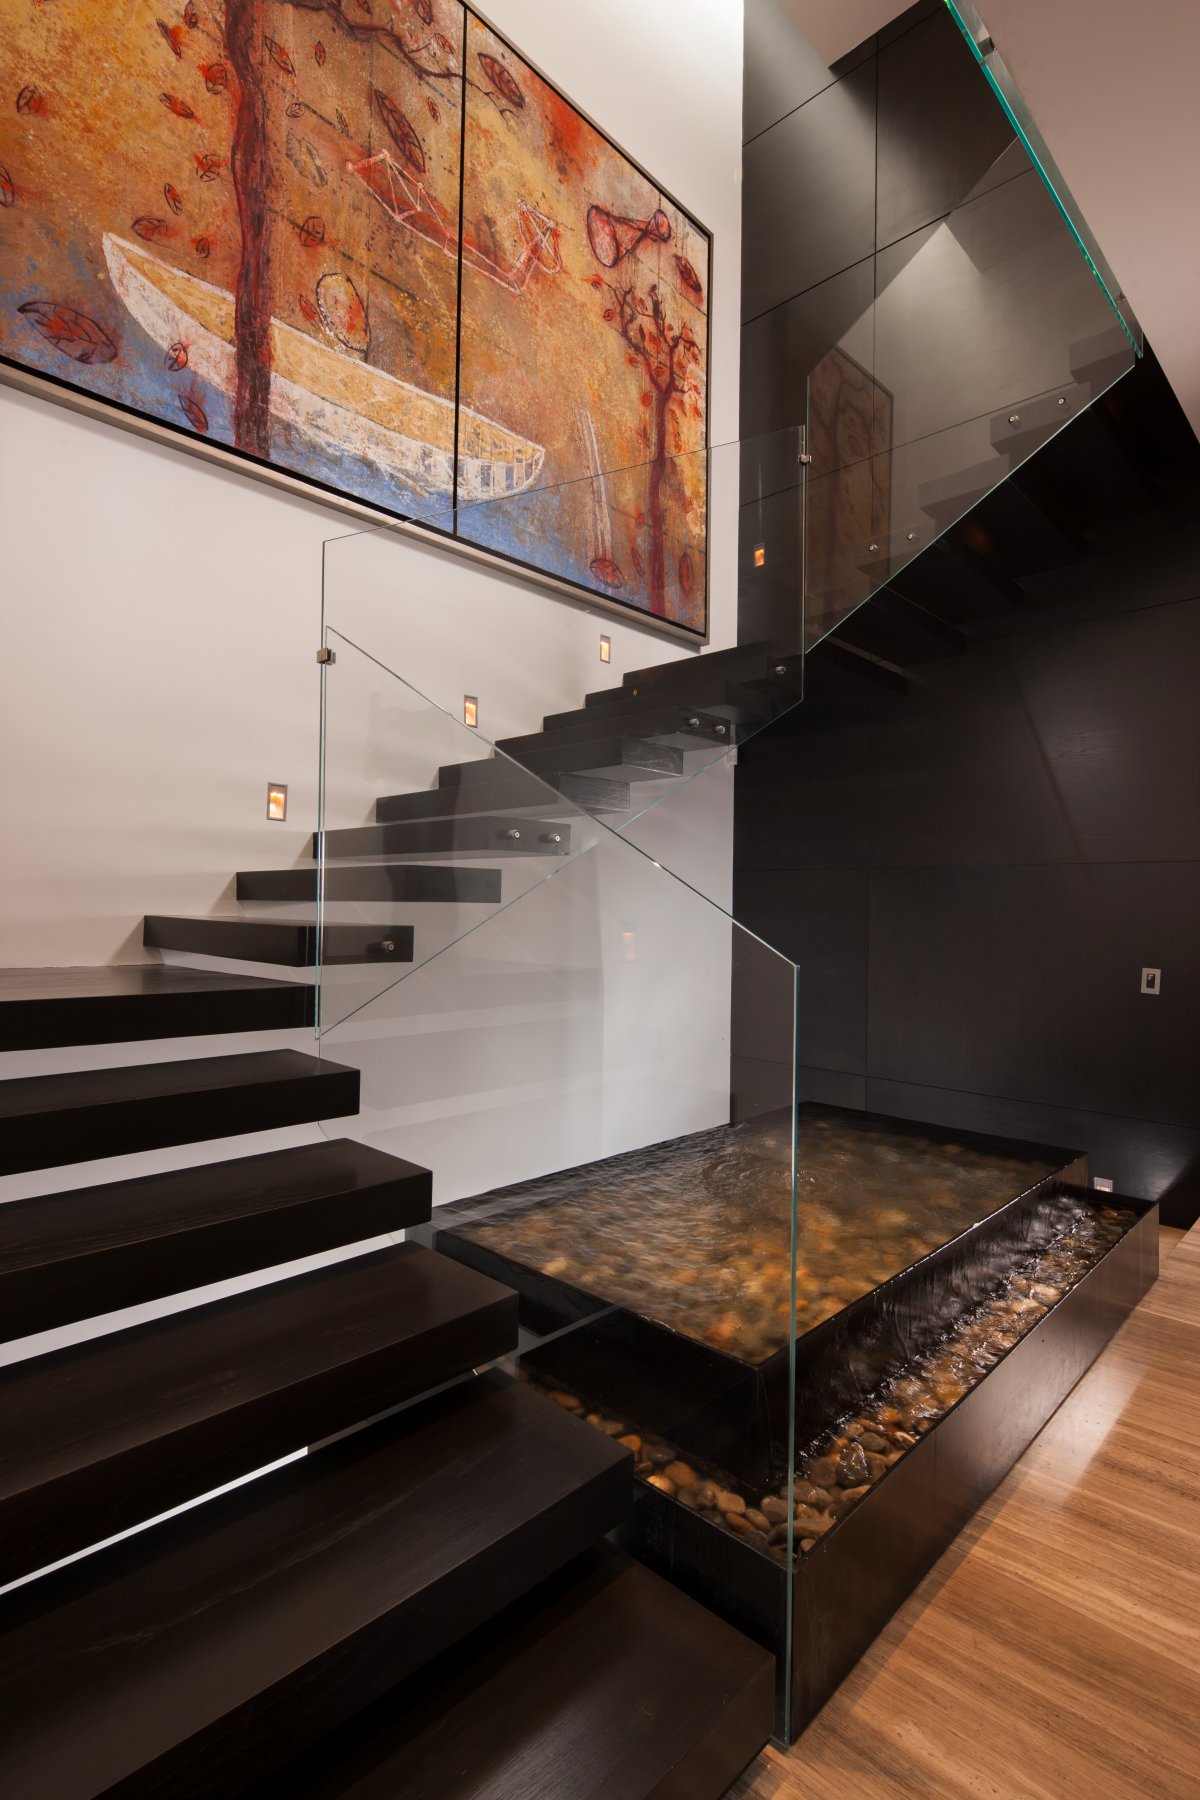 Water Feature, Glass & Wood Stairs, Art, Stylish Contemporary Home in Garza Garcia, Mexico